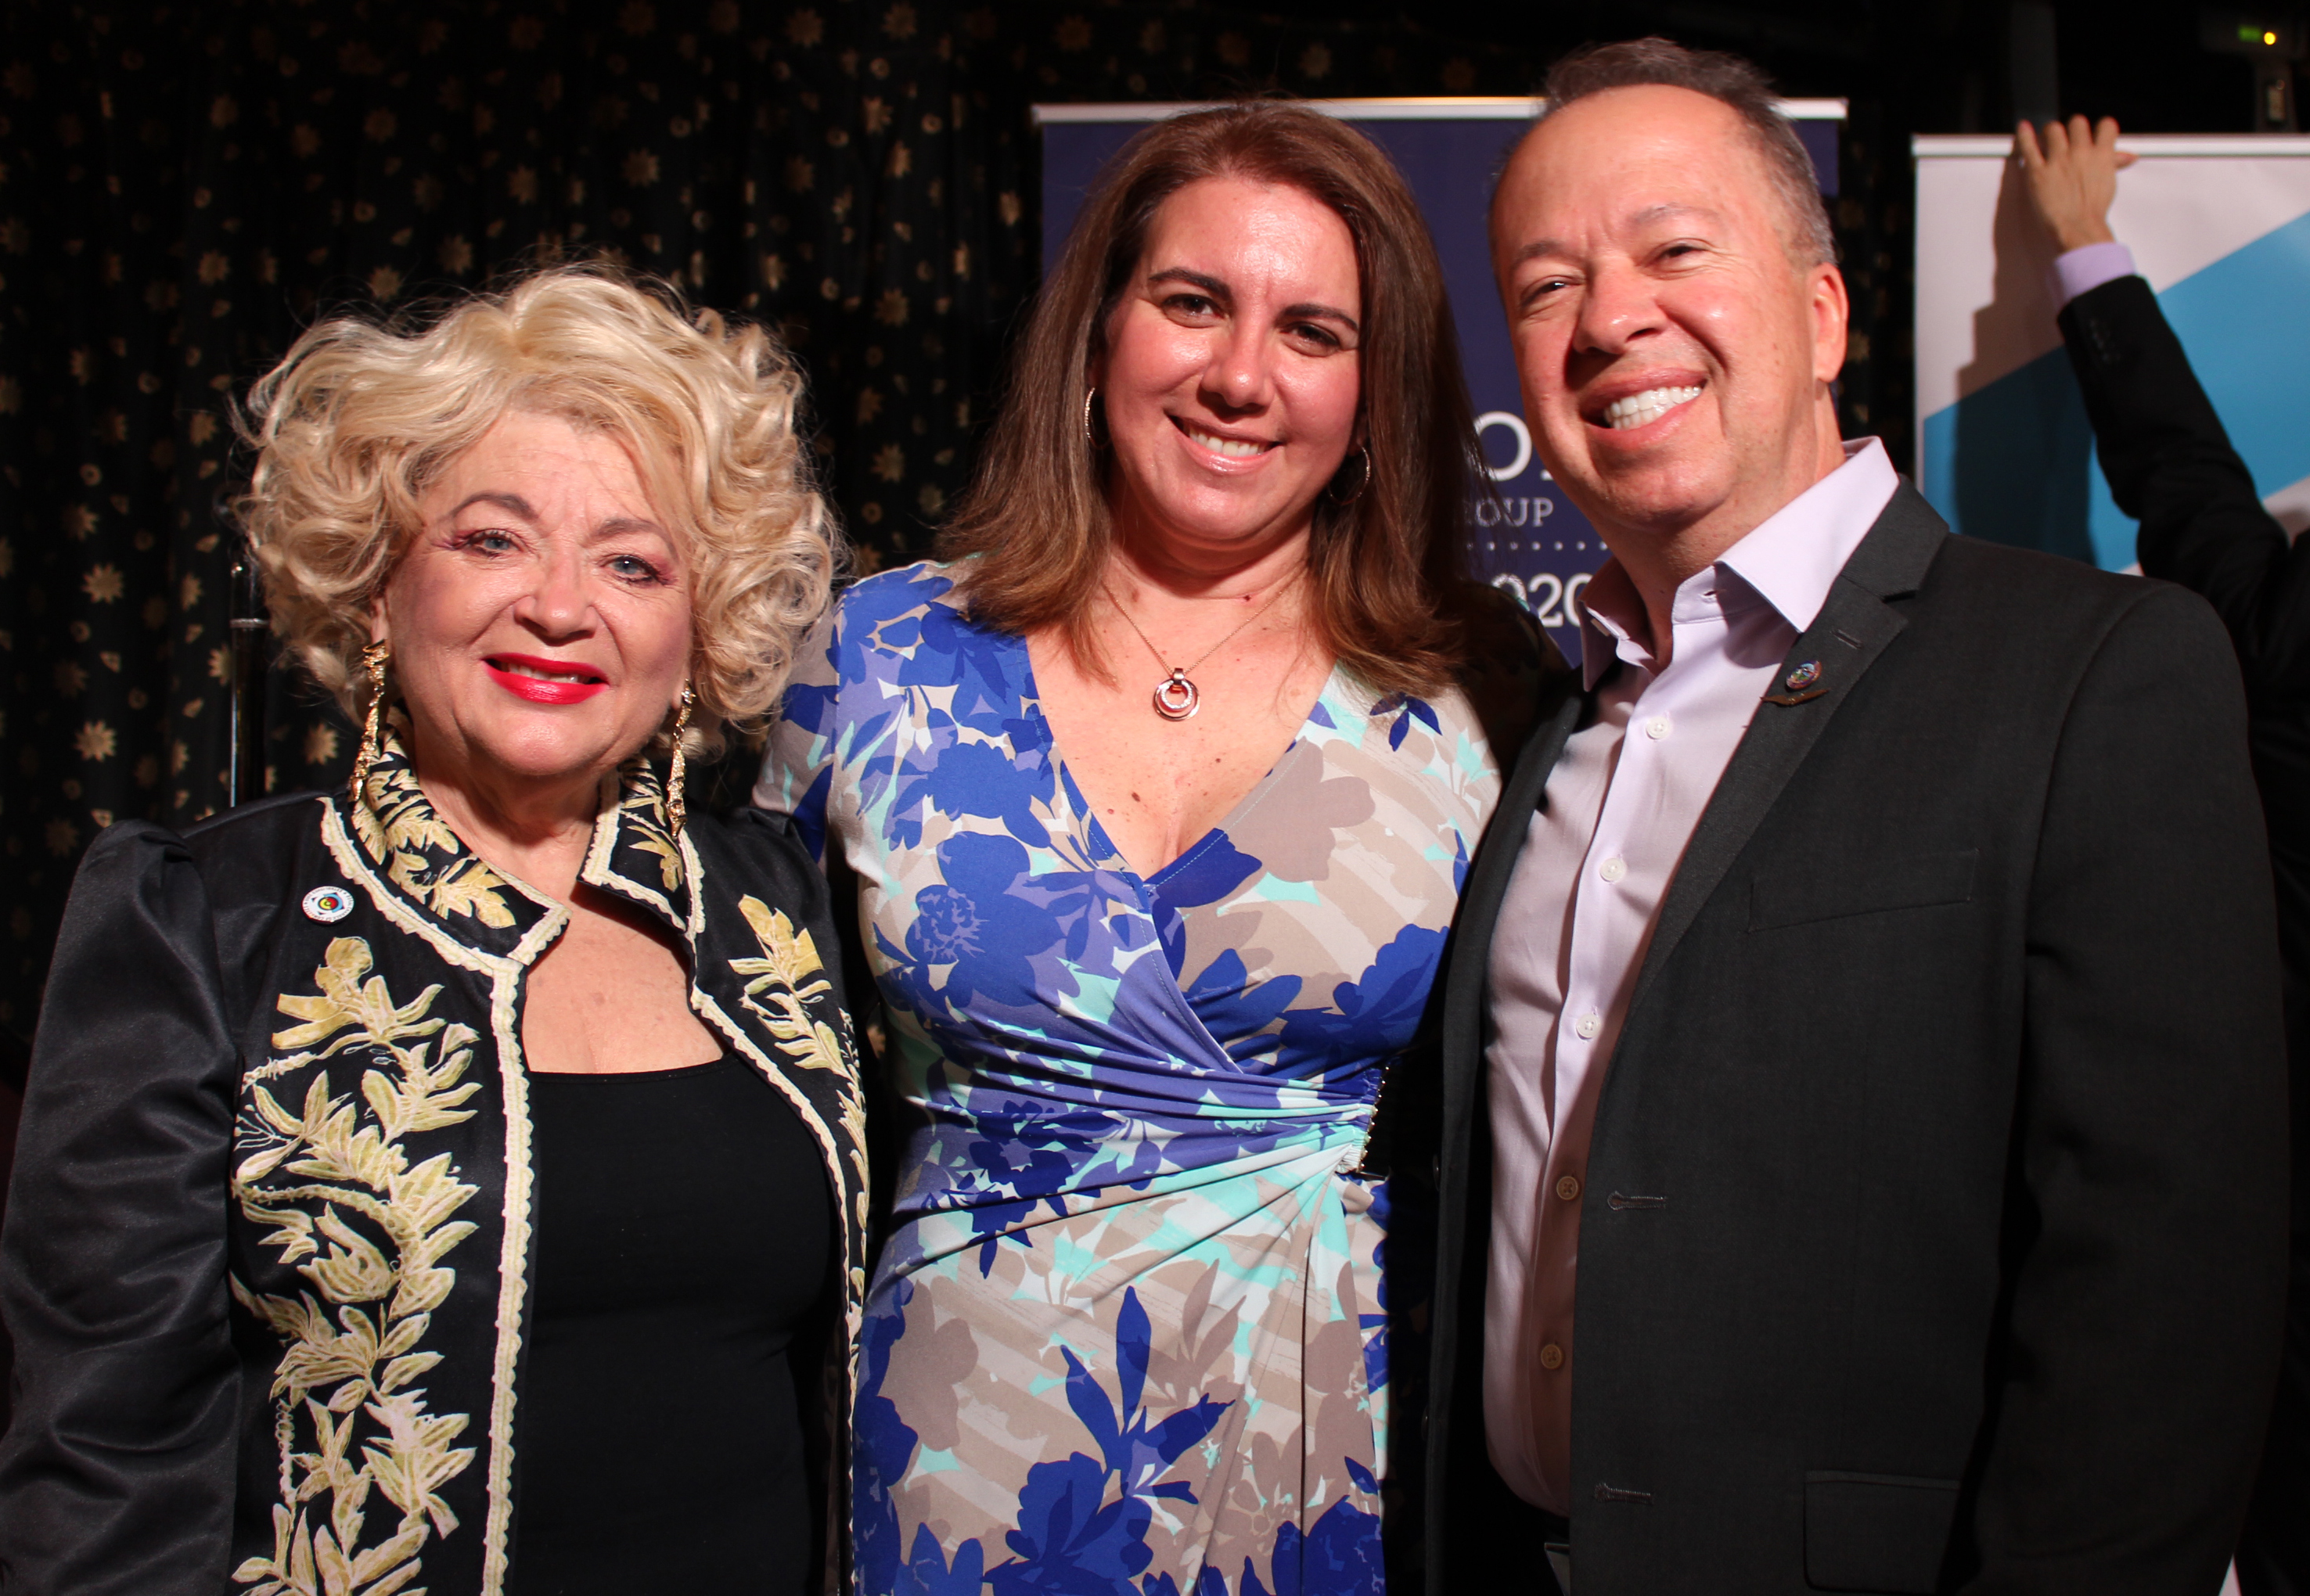 Doral Chamber of Commerce Carnival Cruise Luncheon 2019, Networking Event in Miami, Florida. Group photo with Blanche De Jesus.